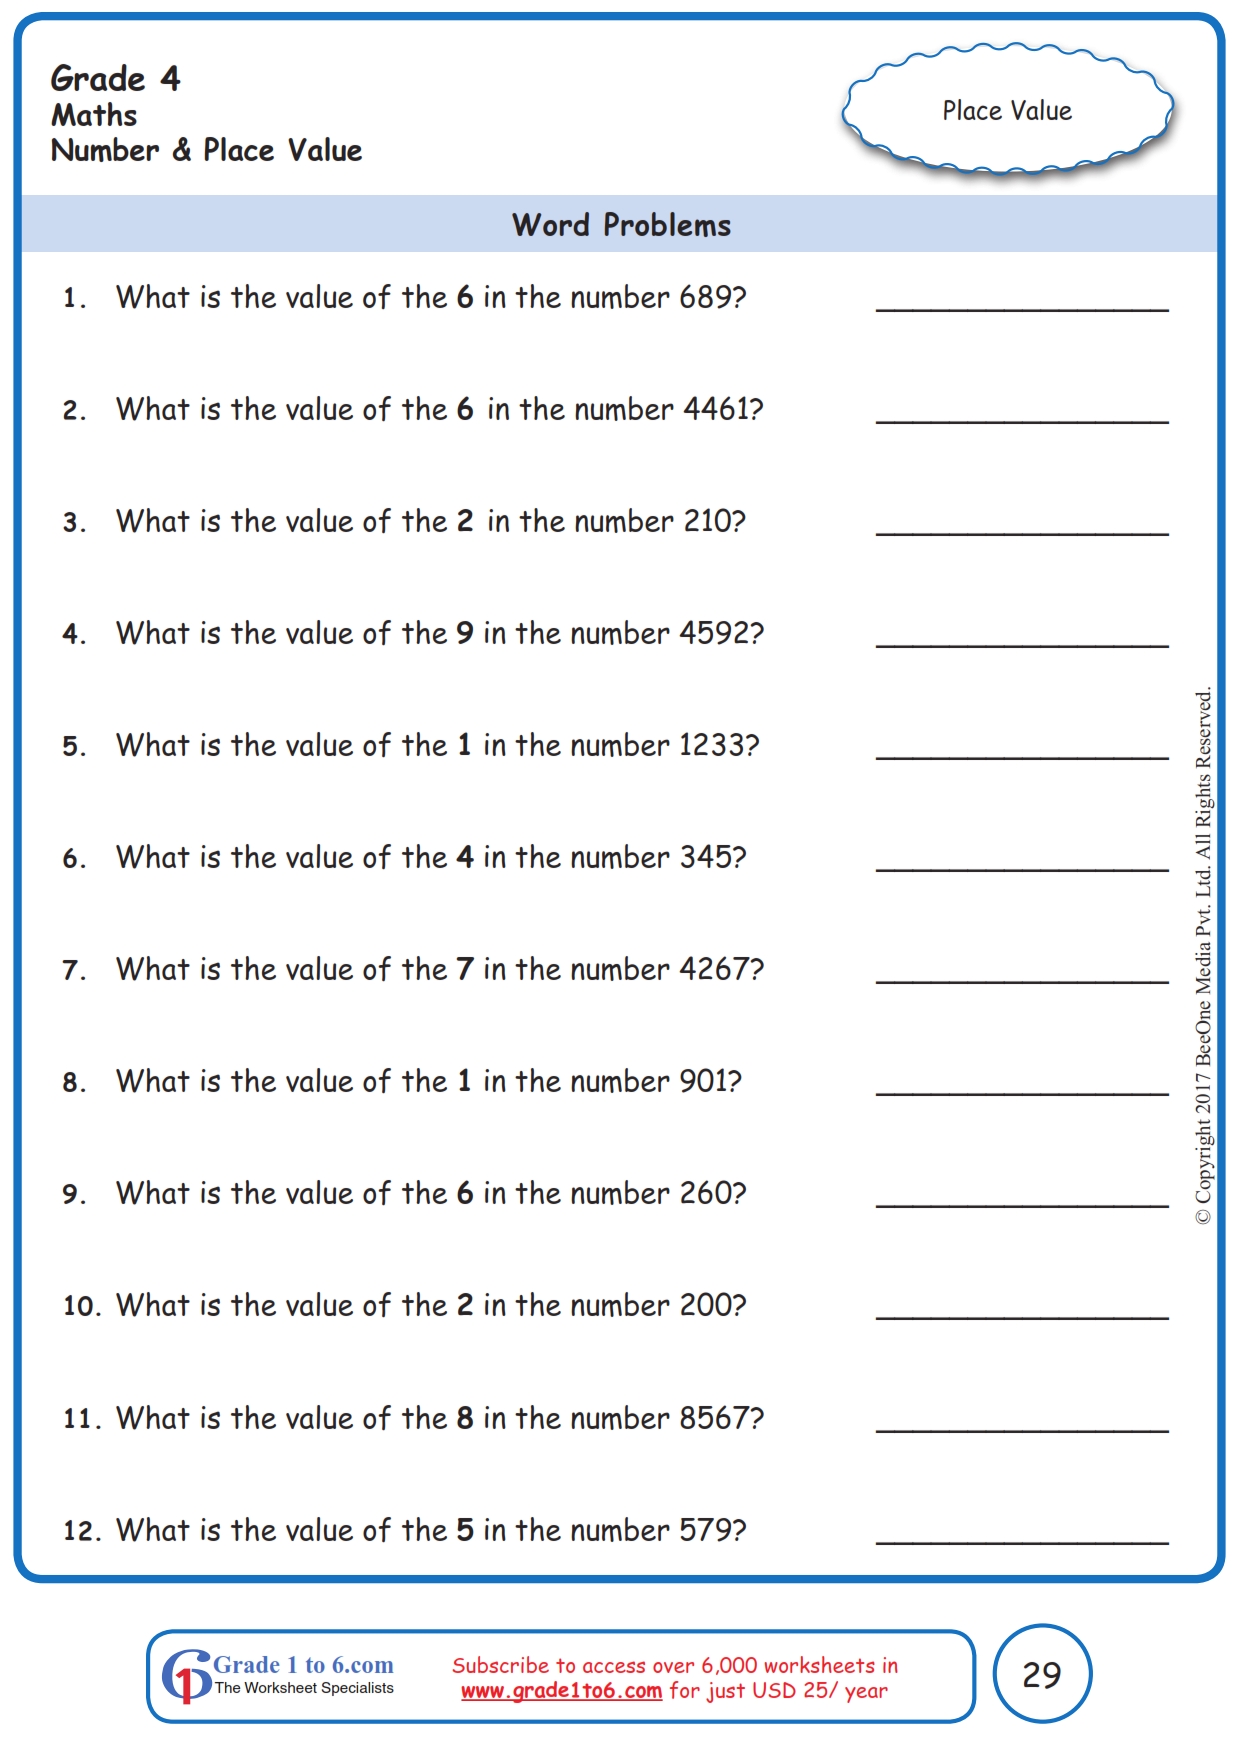 place-values-worksheets